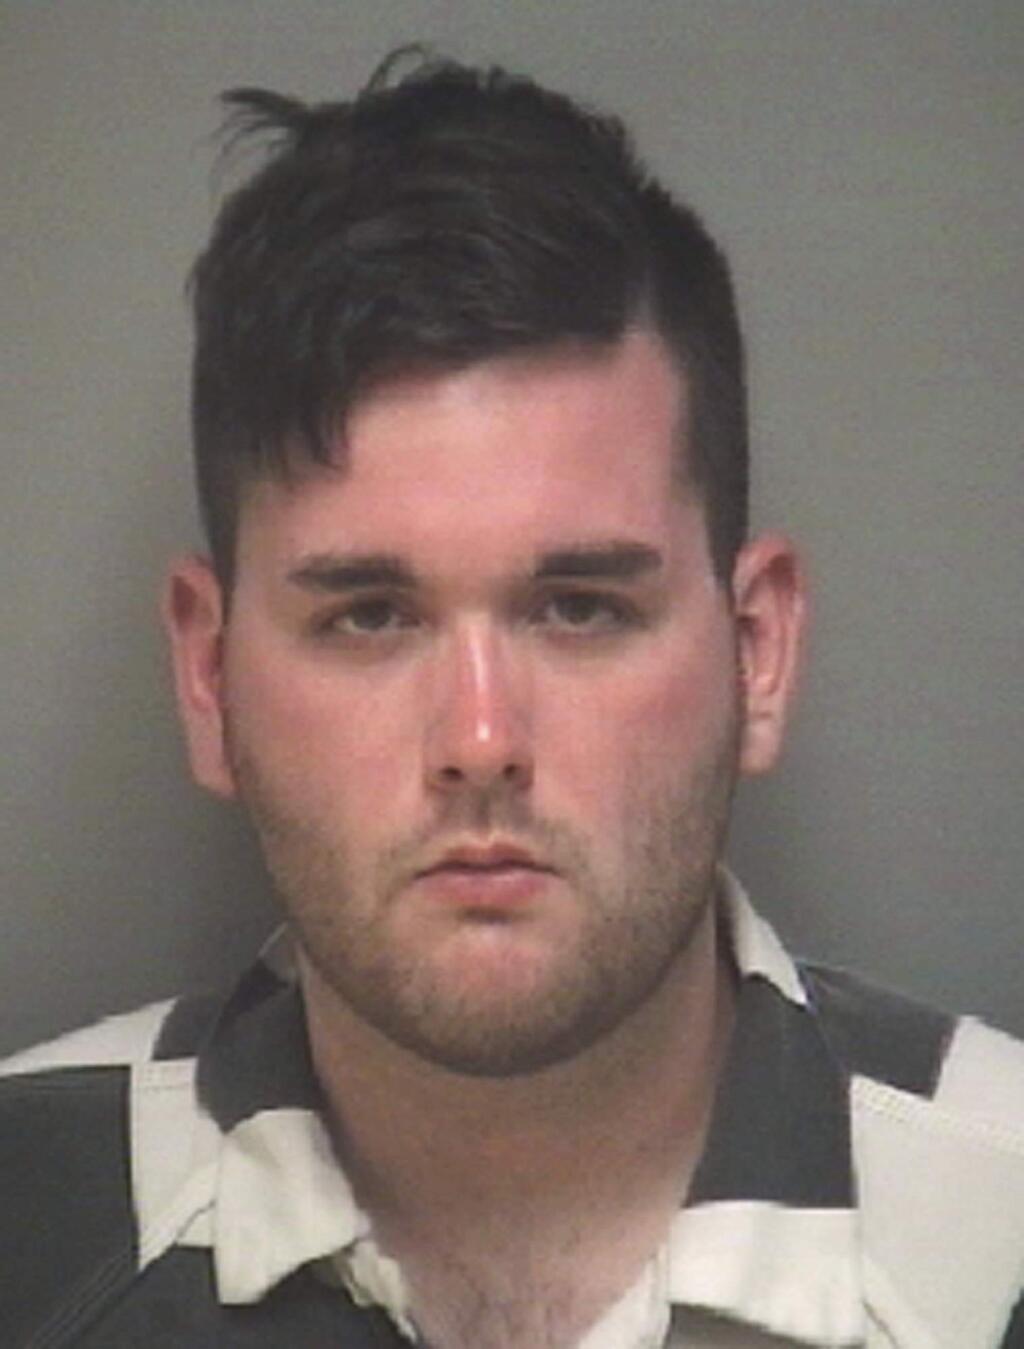 FILE - This undated file photo provided by the Albemarle-Charlottesville Regional Jail shows James Alex Fields Jr., accused of plowing a car into a crowd of people protesting a white nationalist rally in Charlottesville, Va., killing a woman and injuring dozens more, has been charged with federal hate crimes. The Department of Justice announced that Fields was charged in an indicted returned Wednesday, June 27, 2018. (Albemarle-Charlottesville Regional Jail via AP, File)